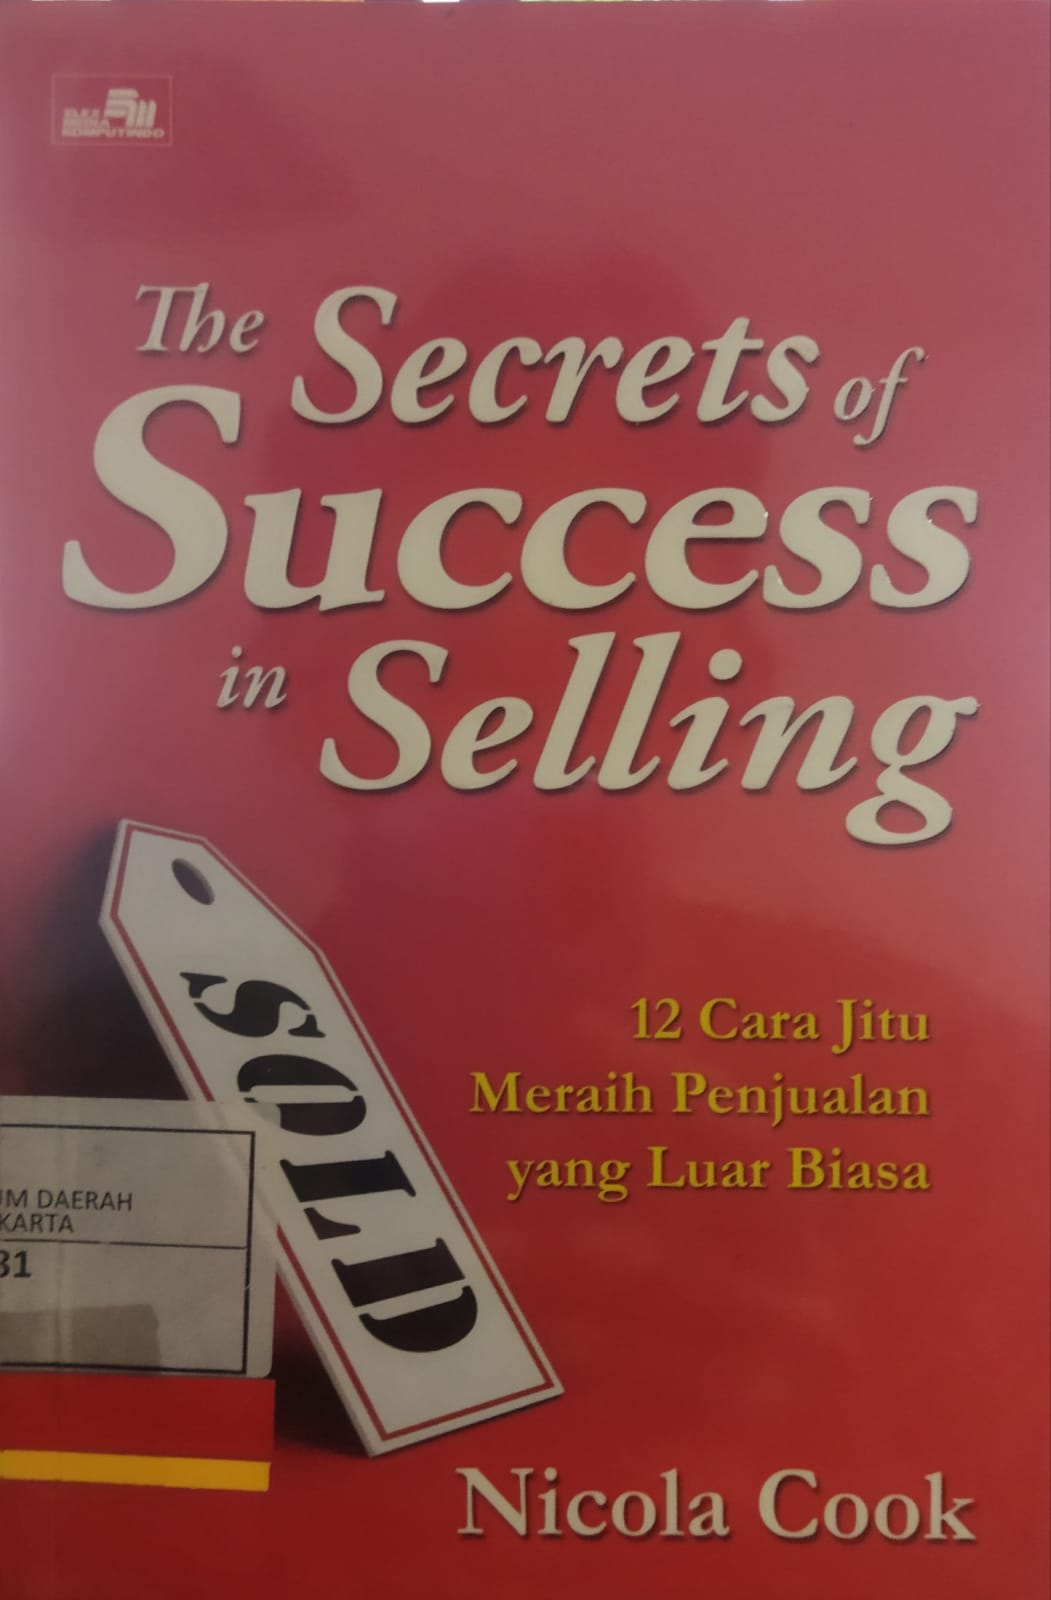 The secrets of success in selling